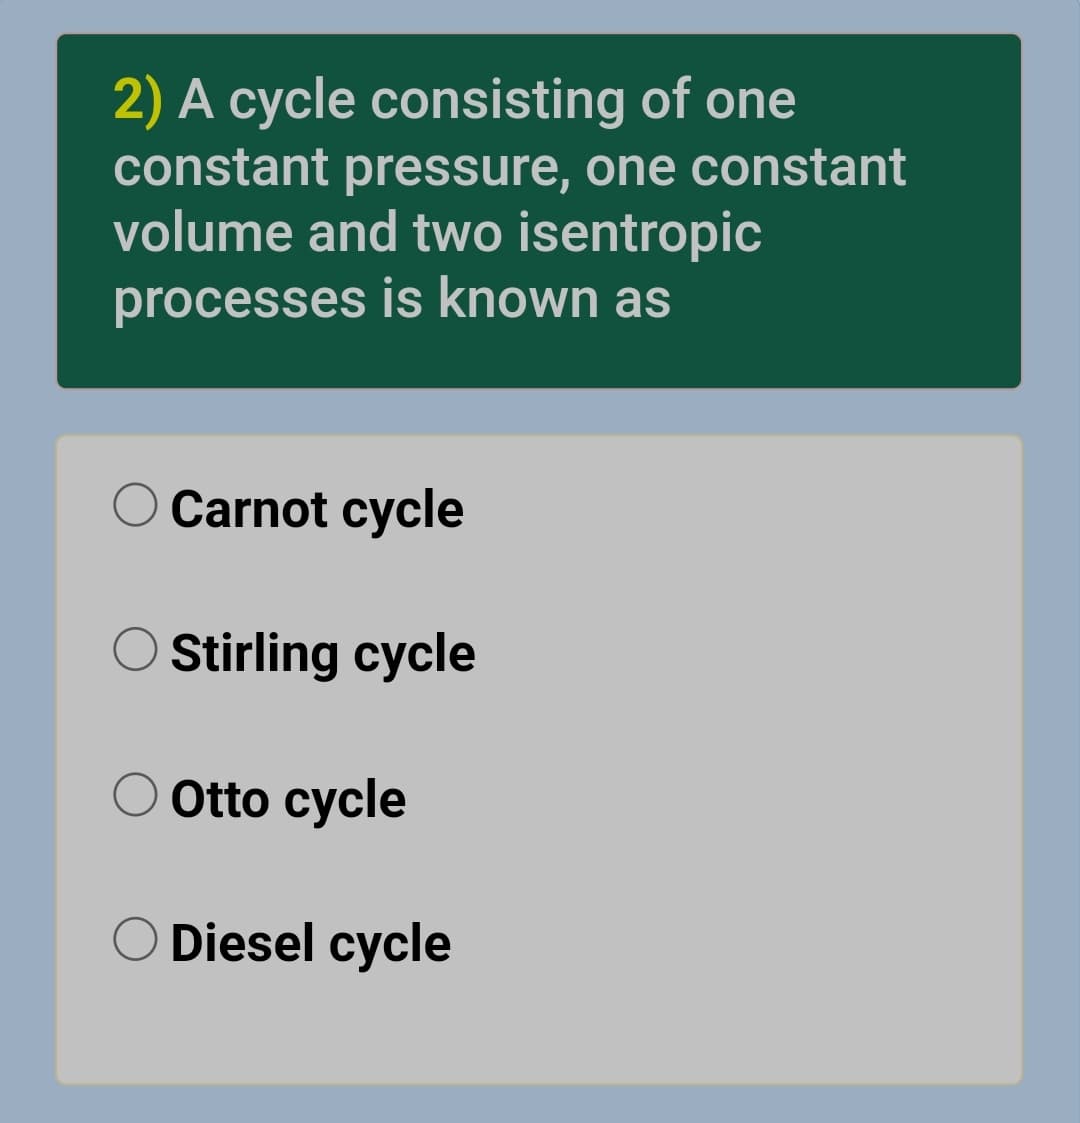 2) A cycle consisting of one
constant pressure, one constant
volume and two isentropic
processes is known as
Carnot cycle
Stirling cycle
Otto cycle
Diesel cycle
